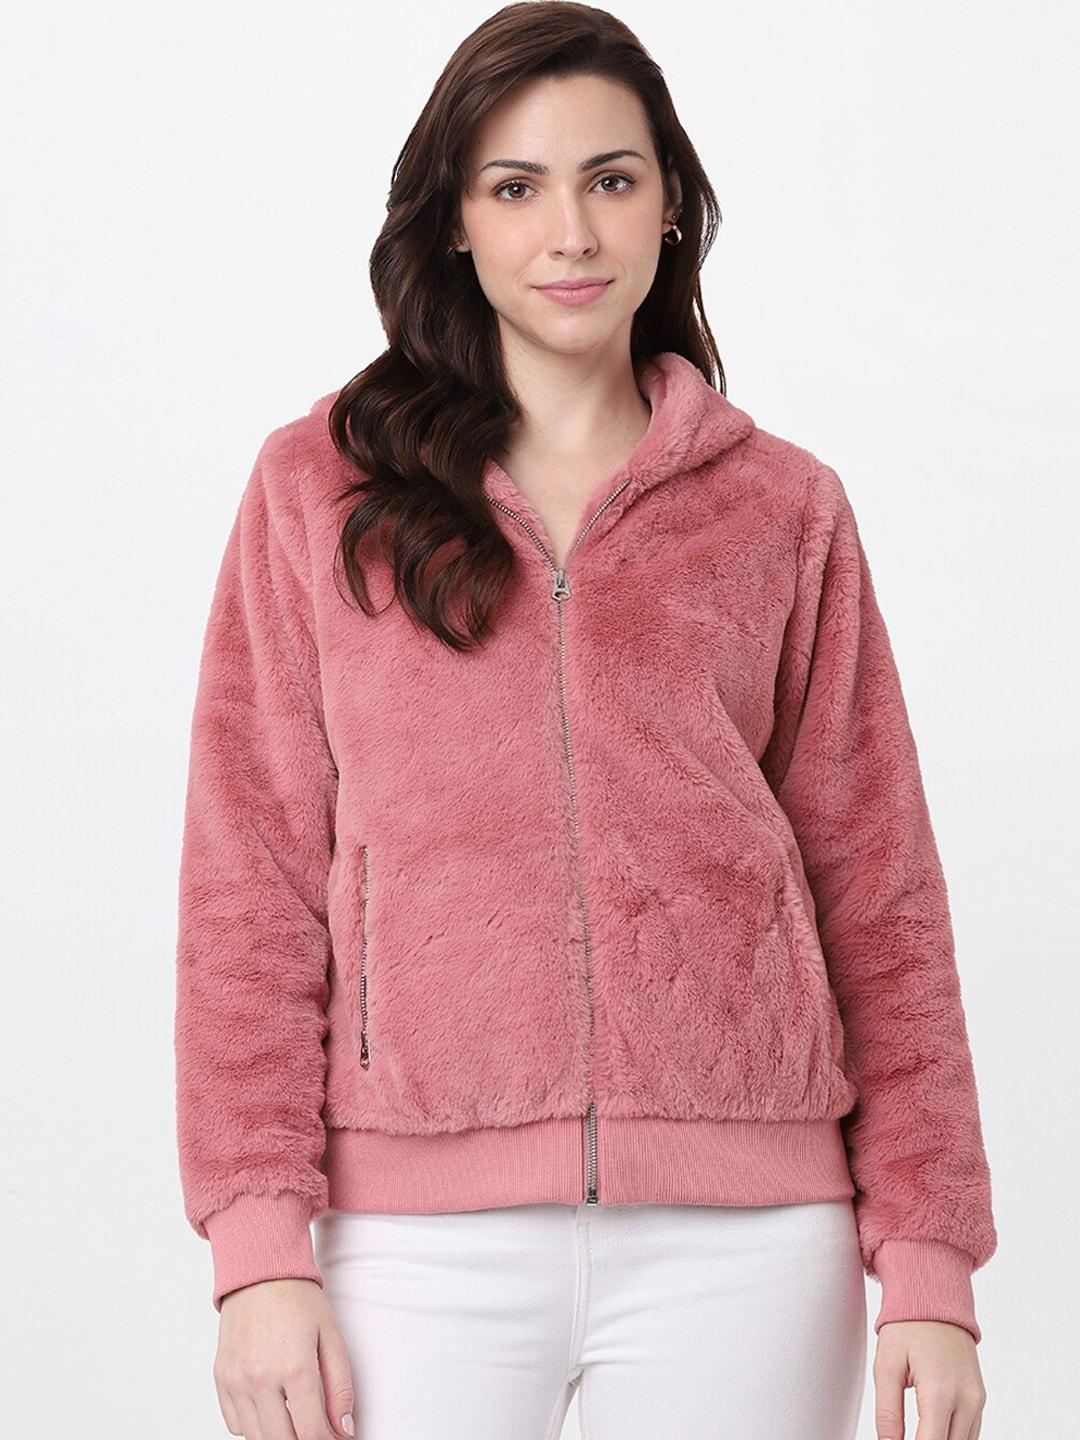 and-women-pink-bomber-jacket